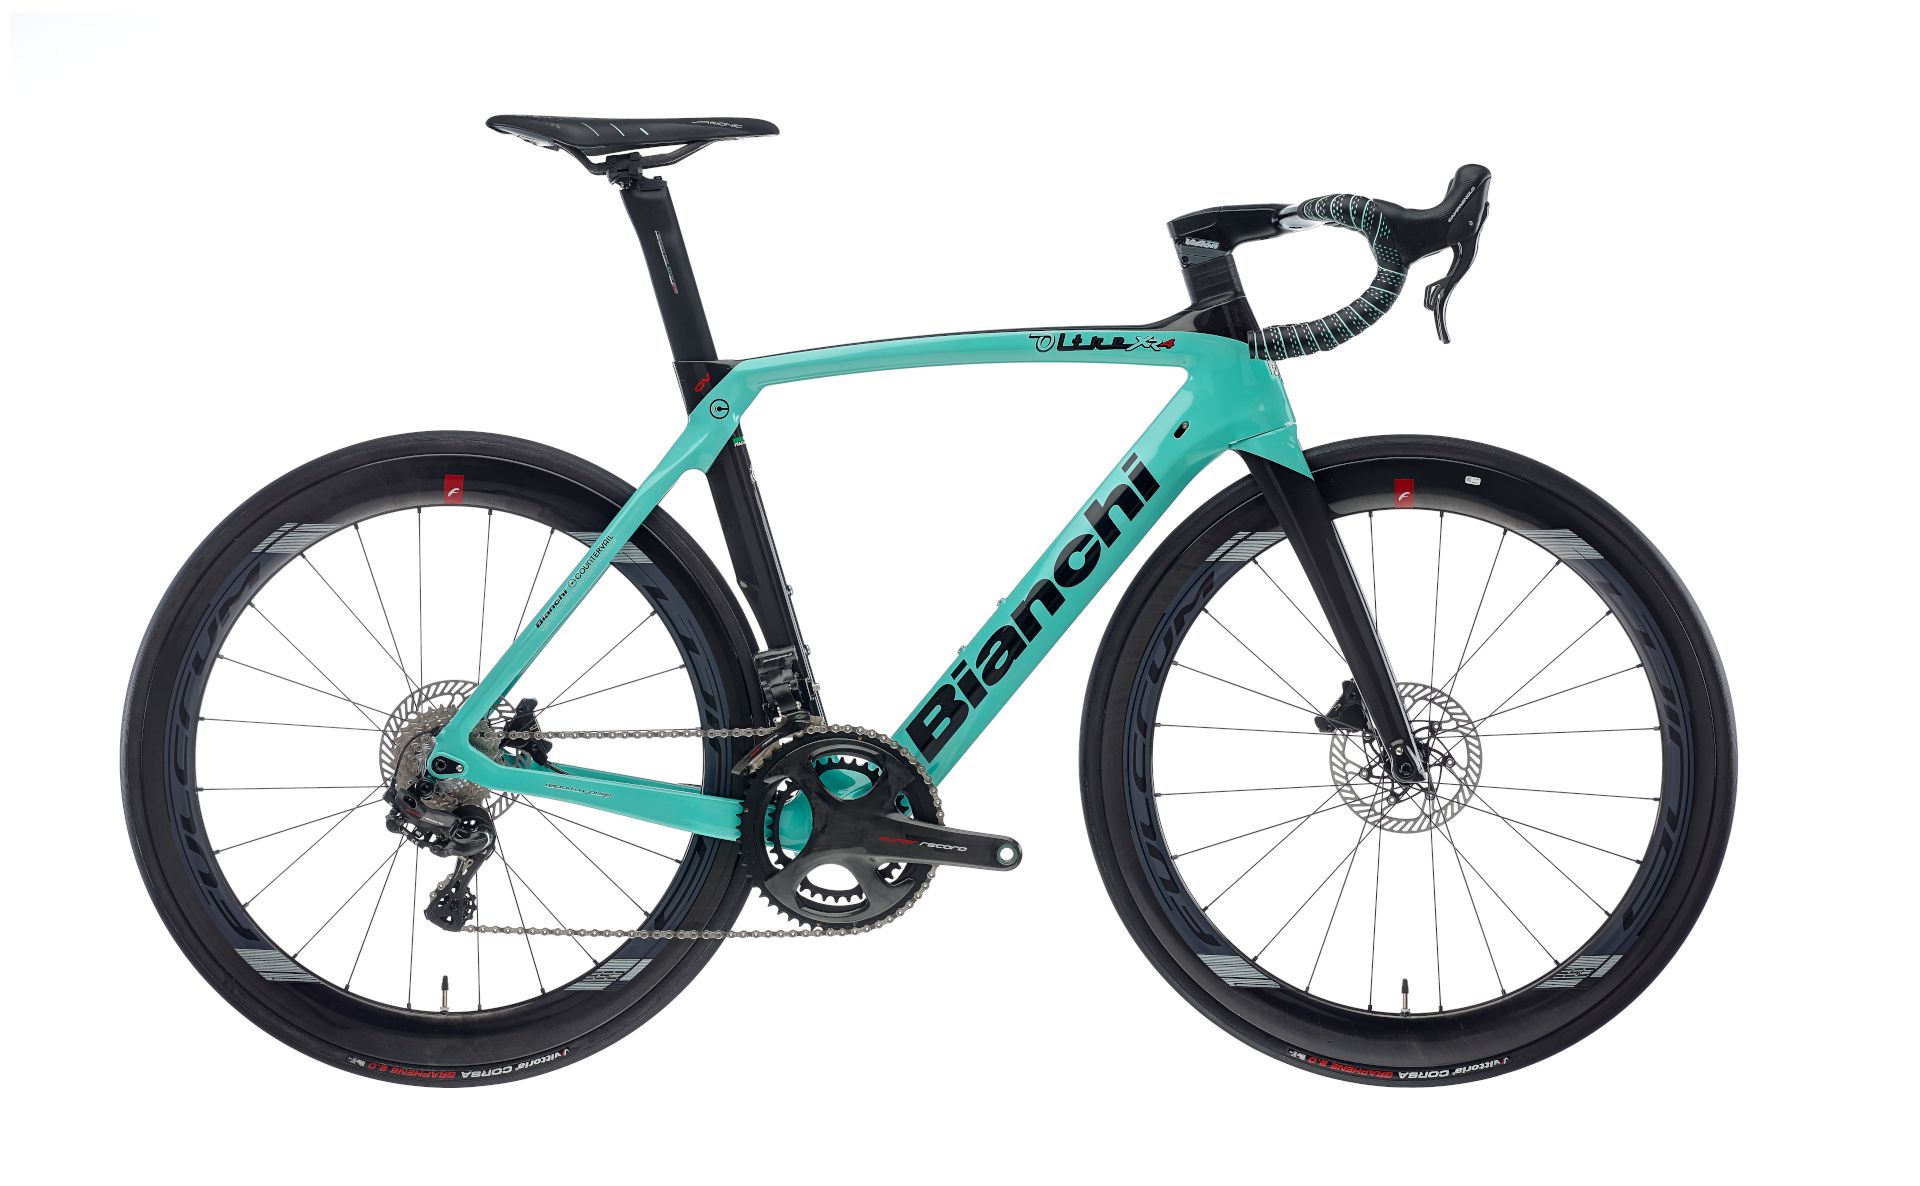 Oltre XR4 Disc - Super Record EPS 12sp 52/36 - Bianchi Bicycles